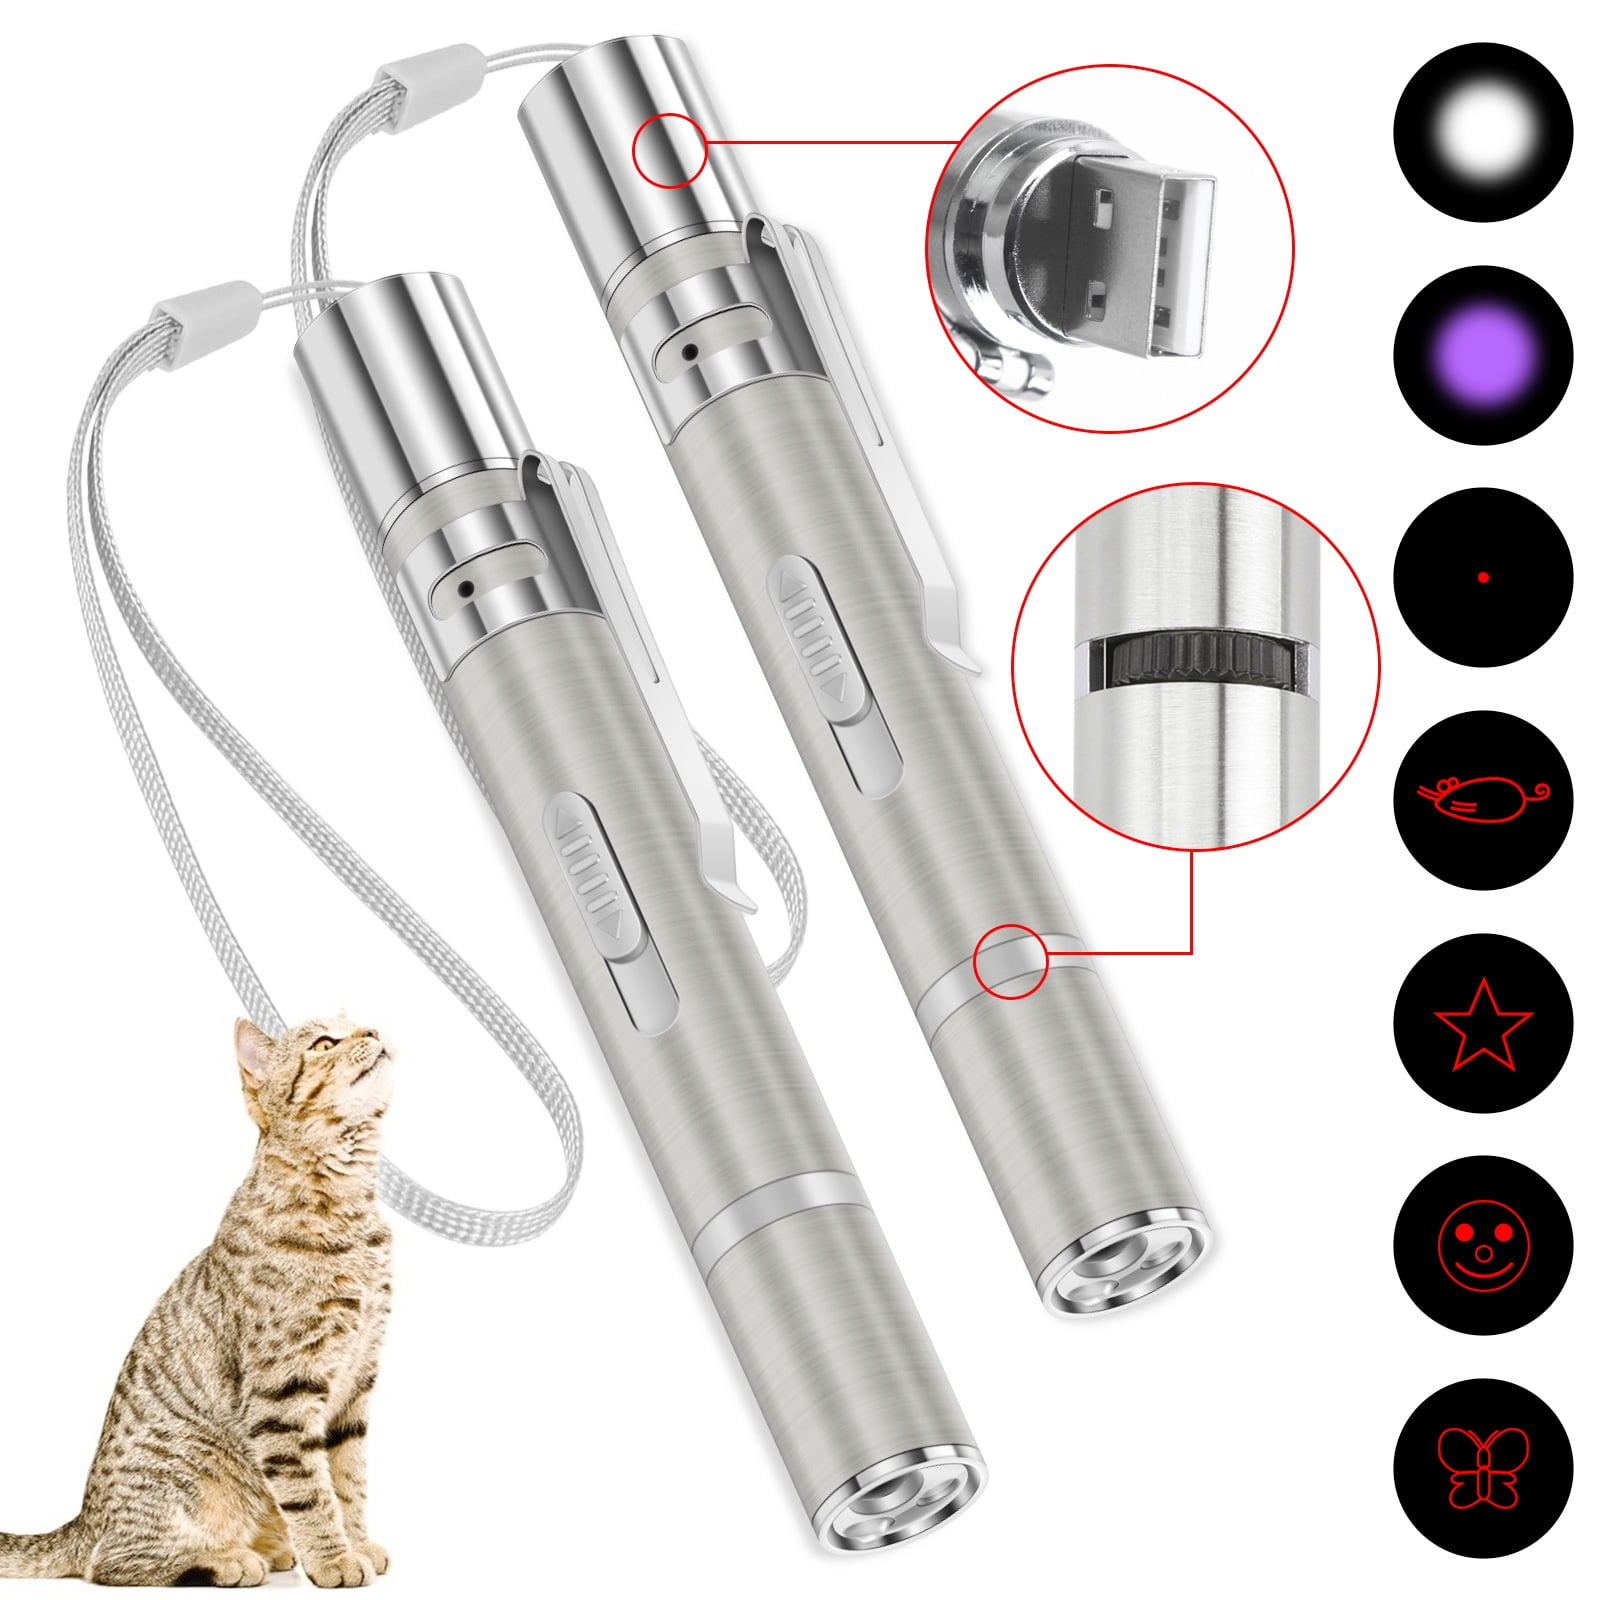 LED TORCH PETS CAT DOG TOY BRAND x 1 Fashion 2 in-1 LASER & LAZER POINTER PEN 